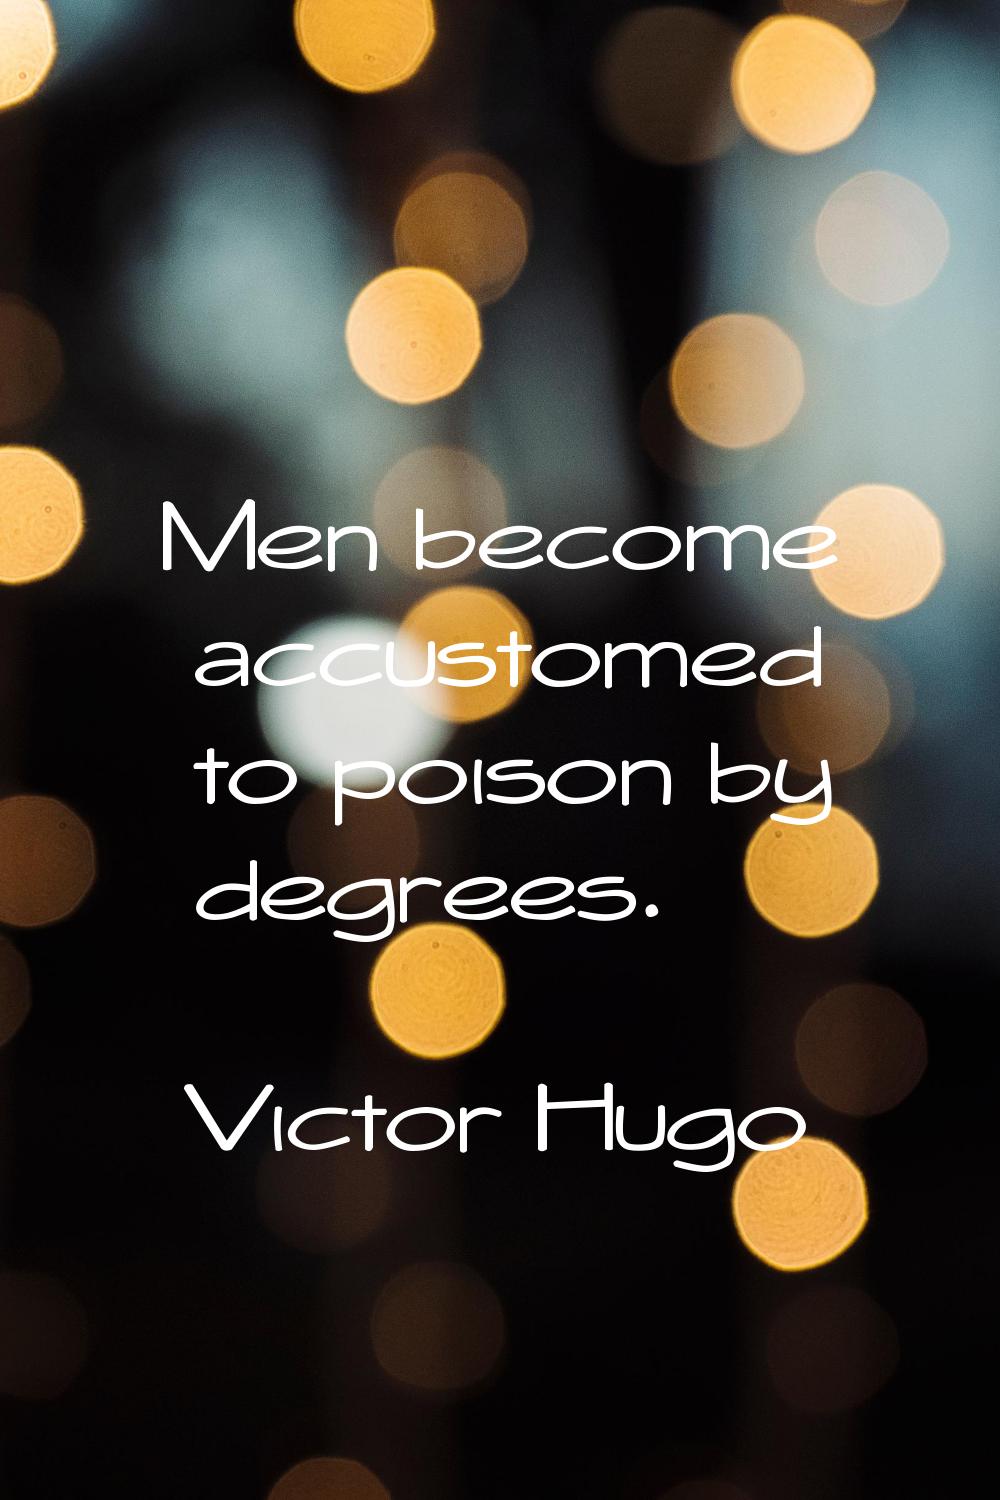 Men become accustomed to poison by degrees.